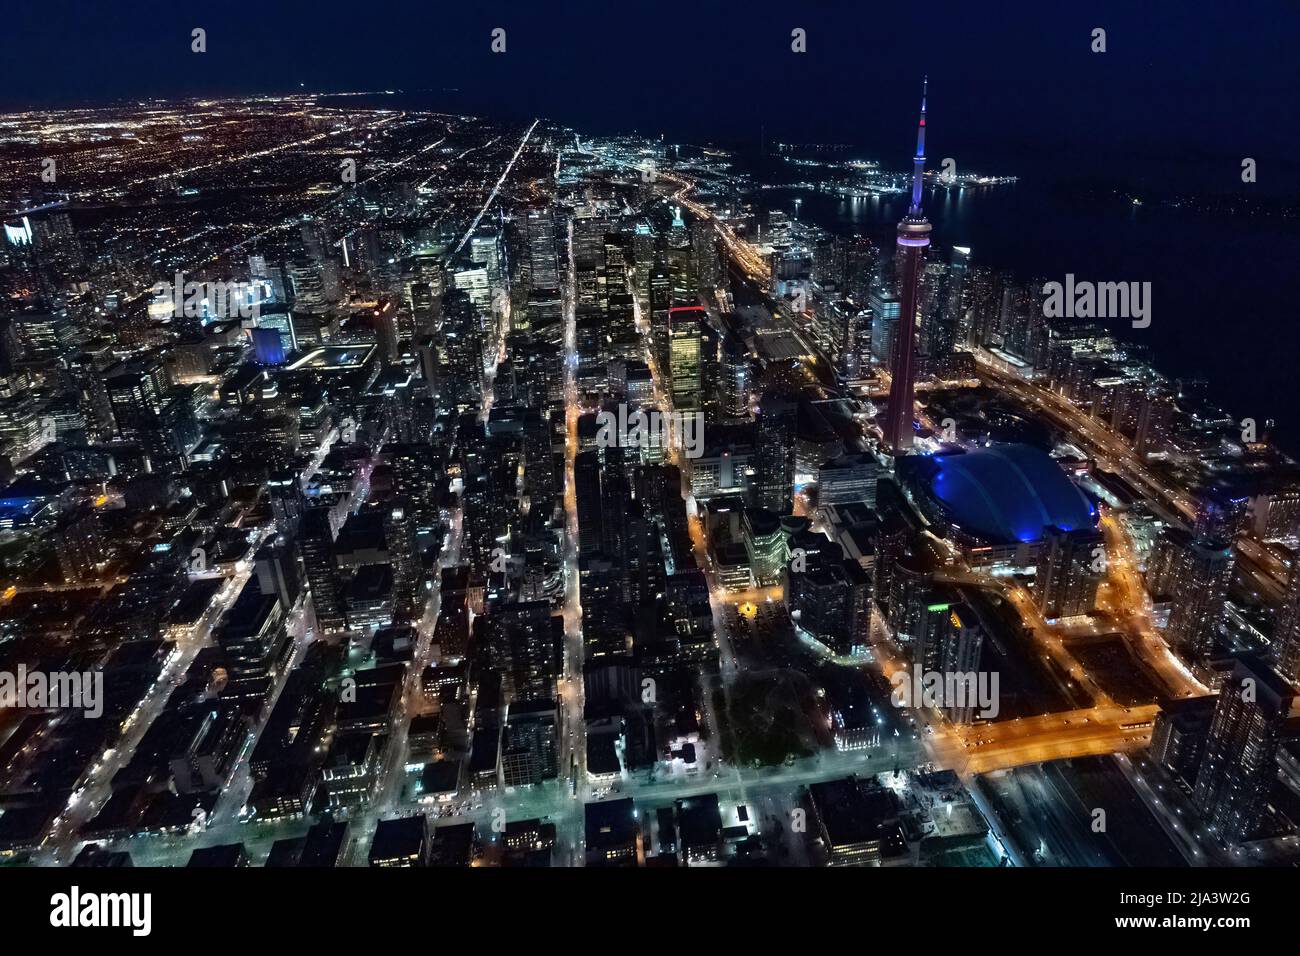 The West of Toronto at night Stock Photo